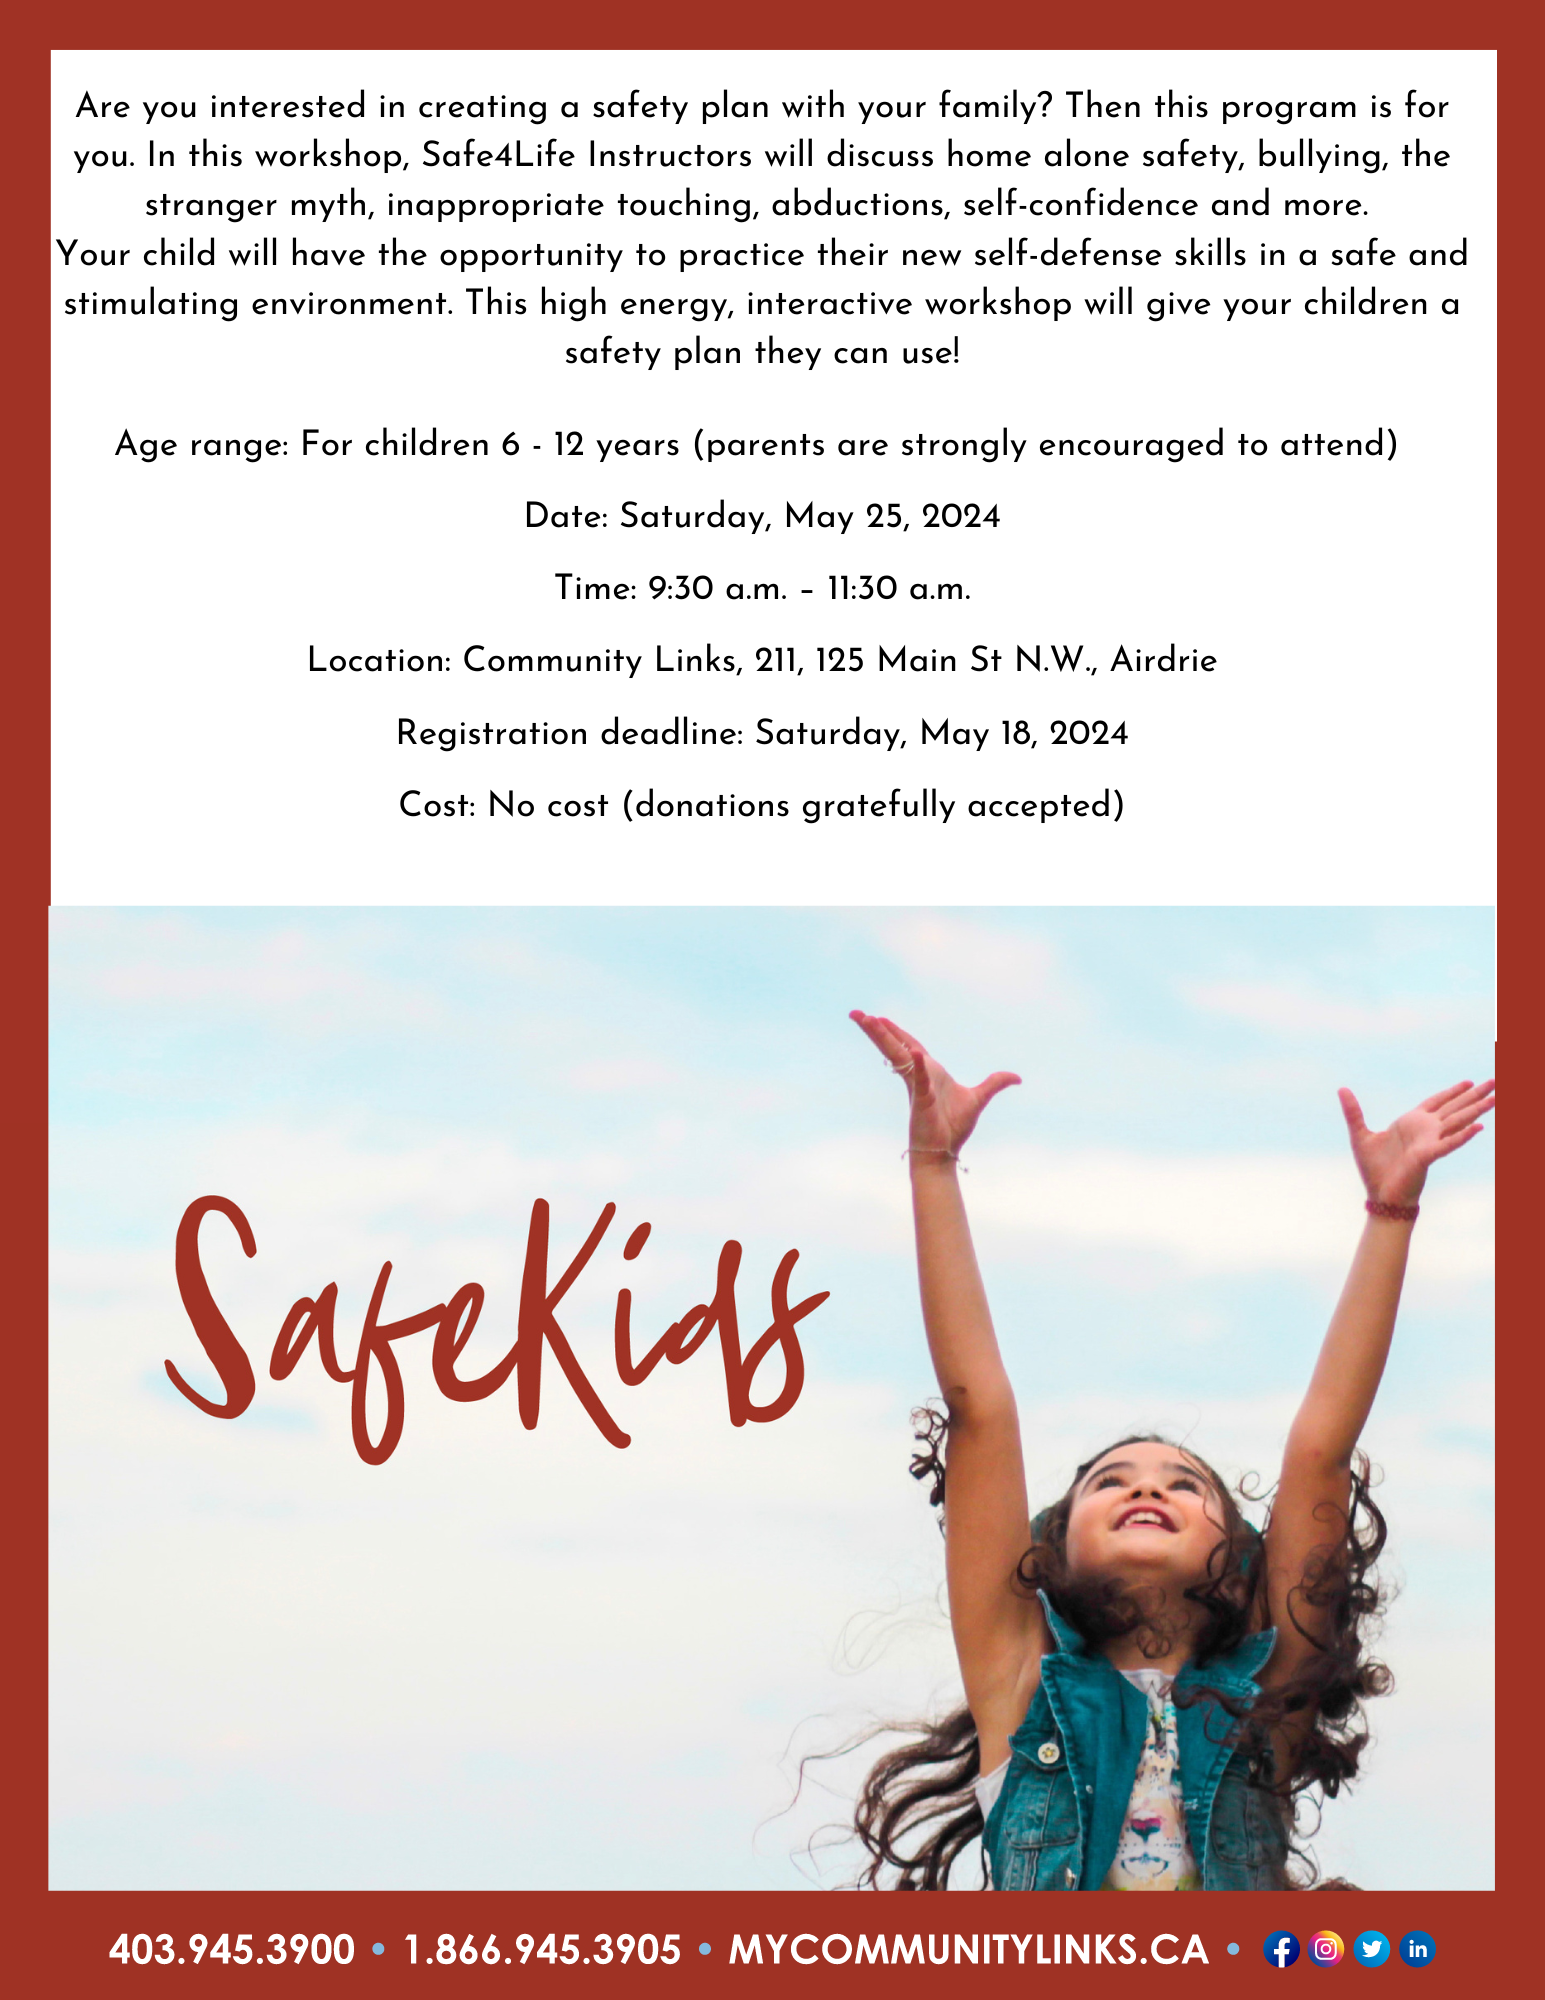 Community Links Airdrie Safe Kids program ages 6-12, May 25, 2024